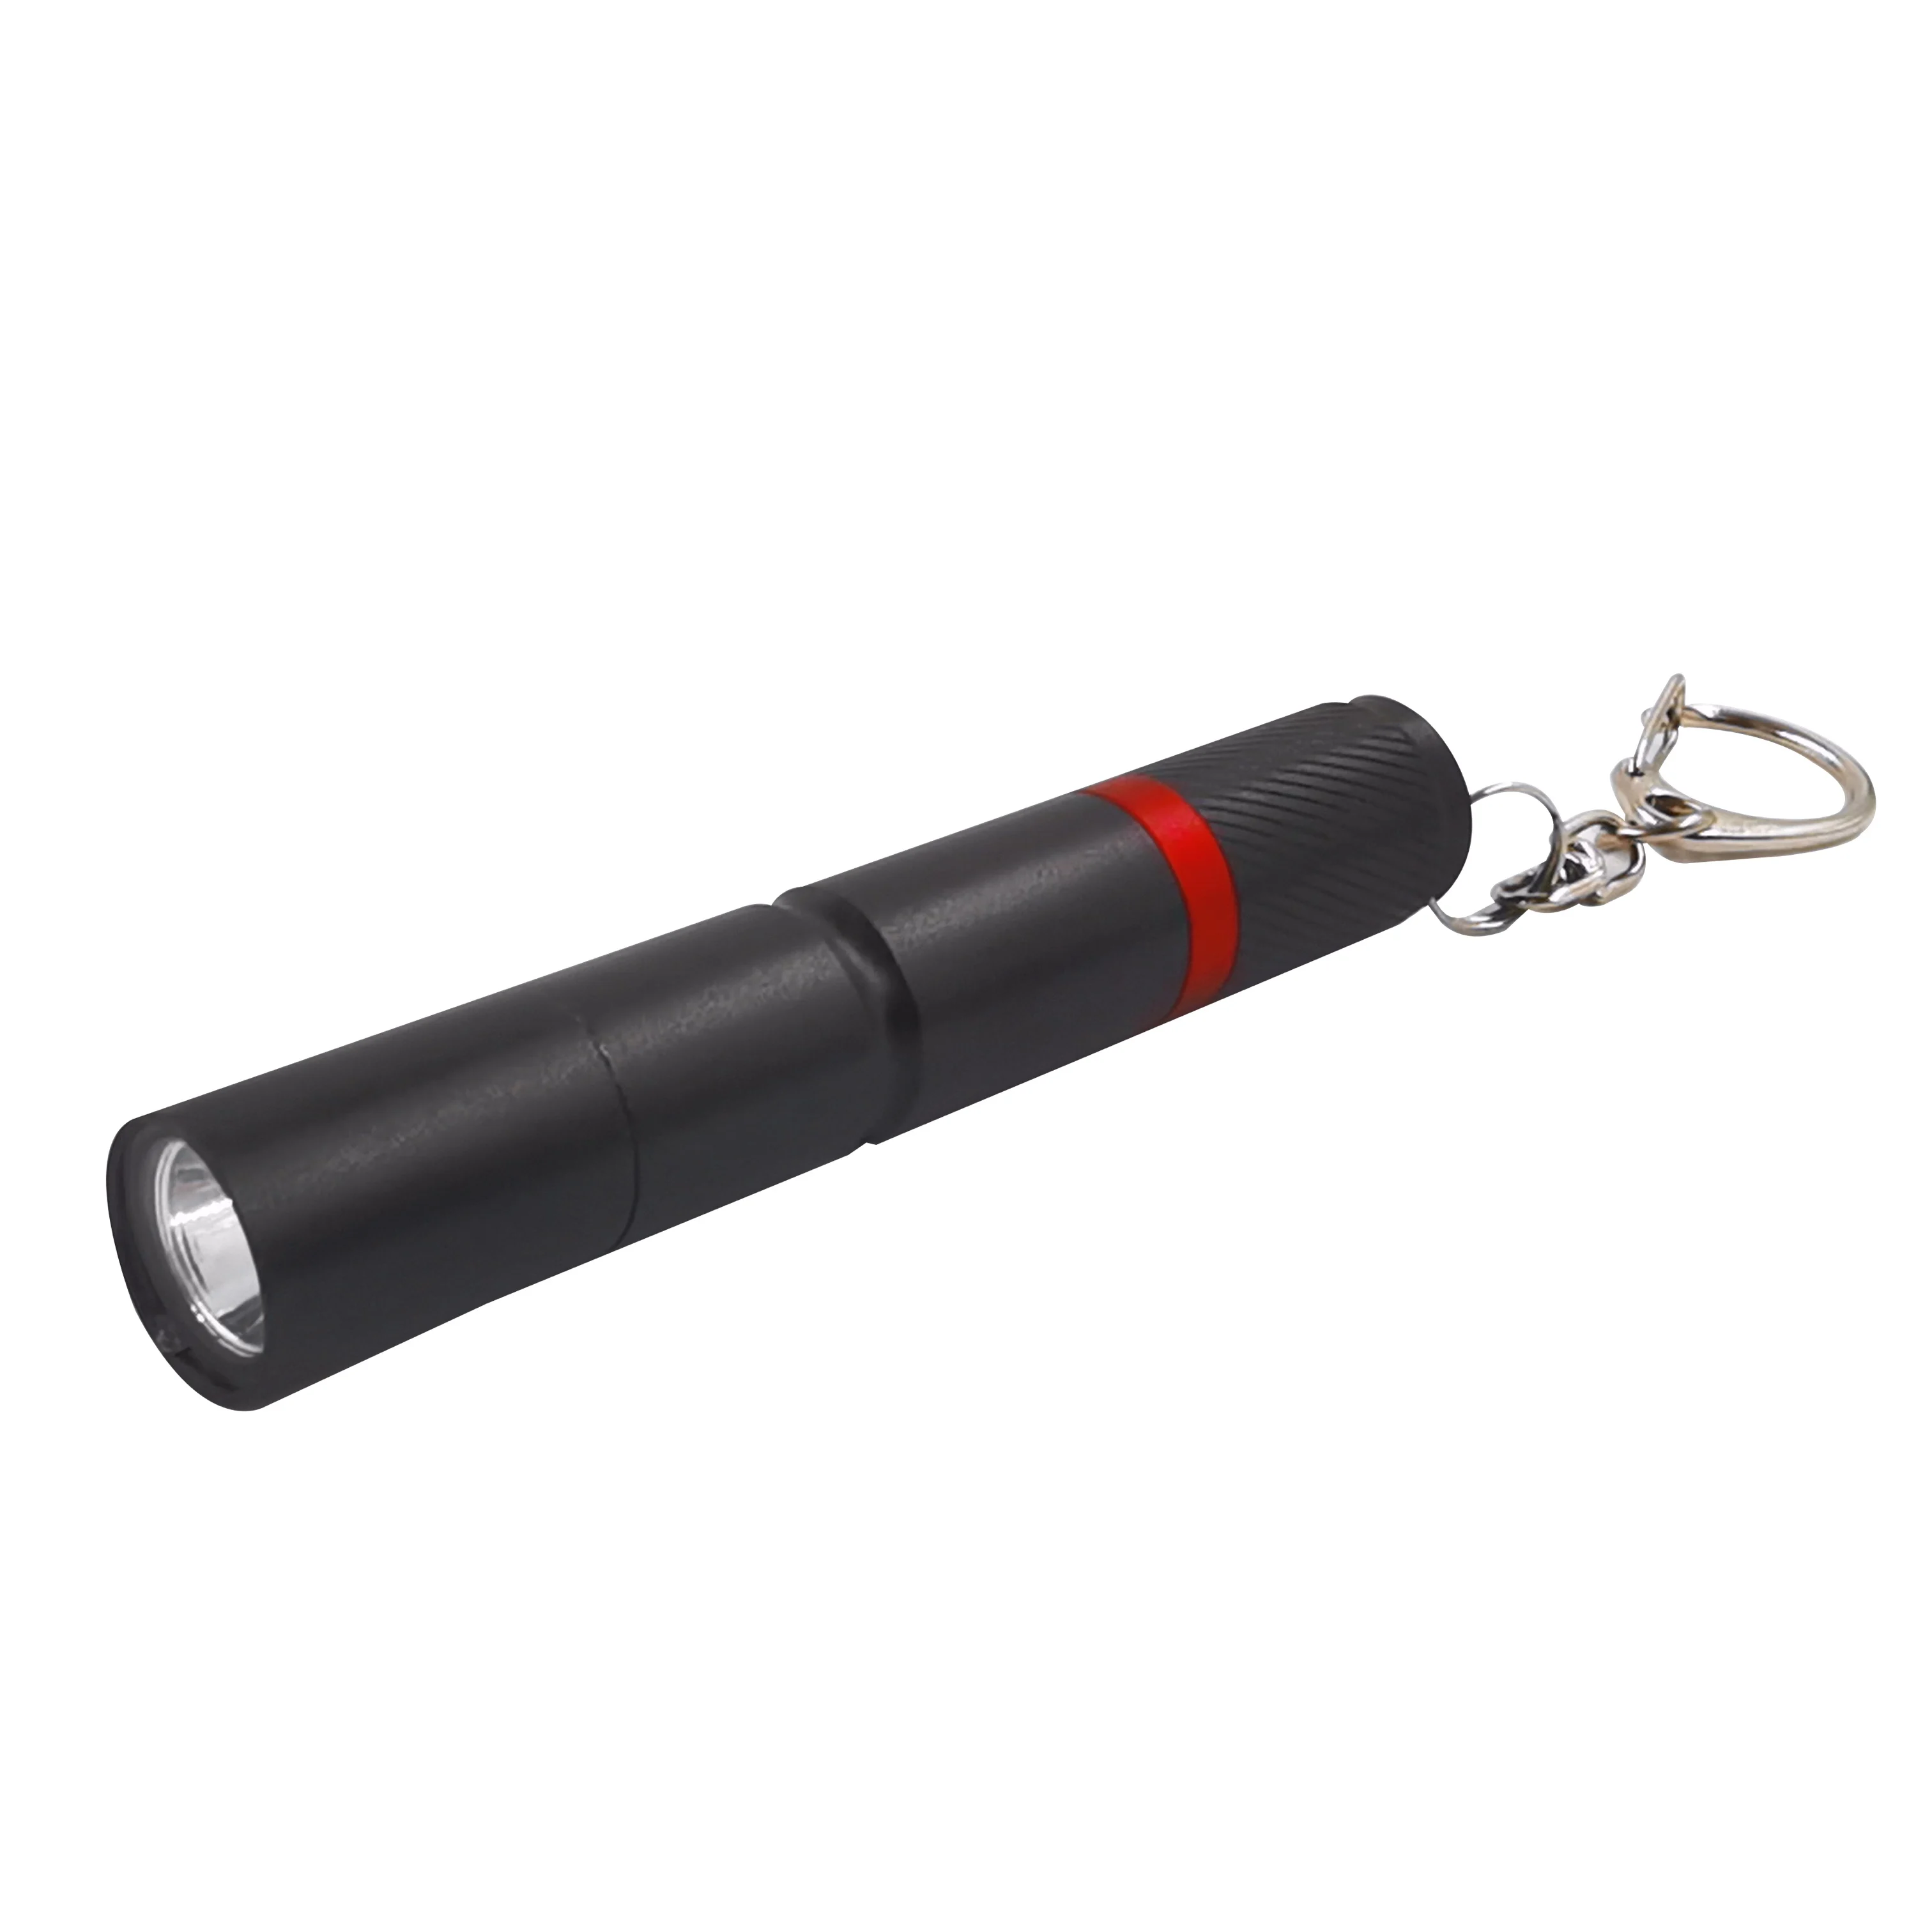 Torch light mini led flashlight waterproof powered by AAA battery flashlight keychain easy to carry